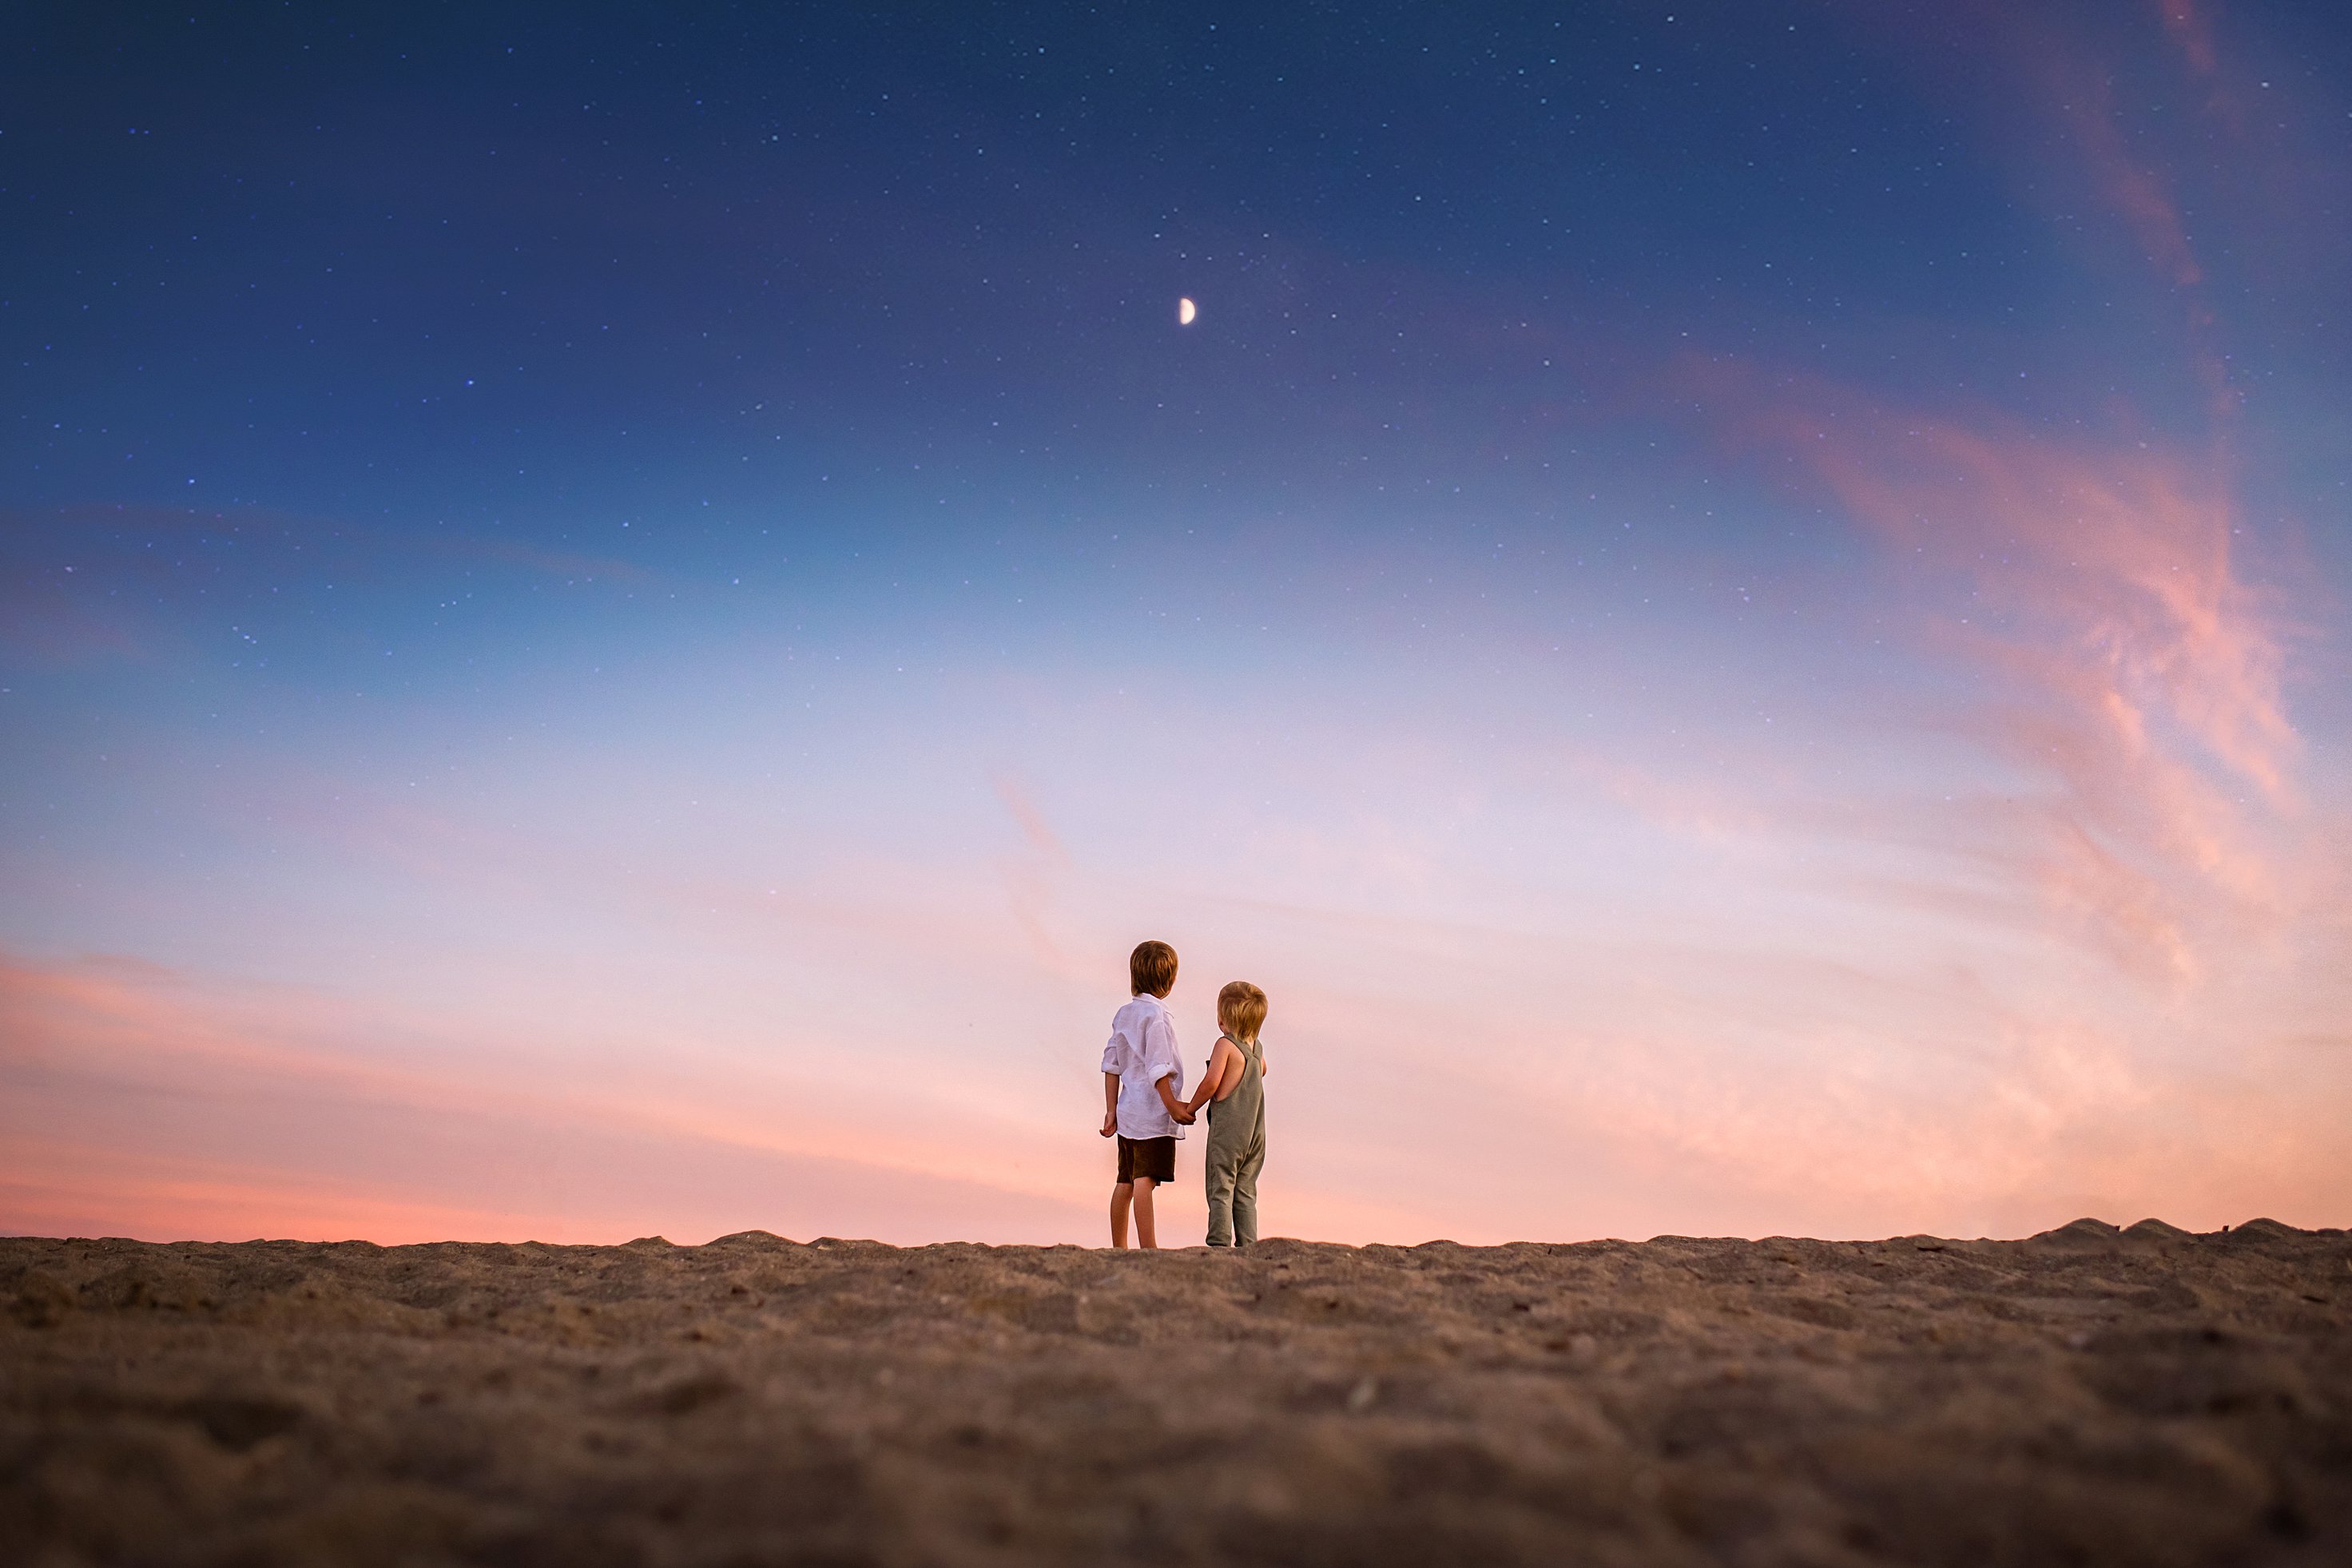 2 children holding hands and staring at the night sky with the moon and stars in the backround